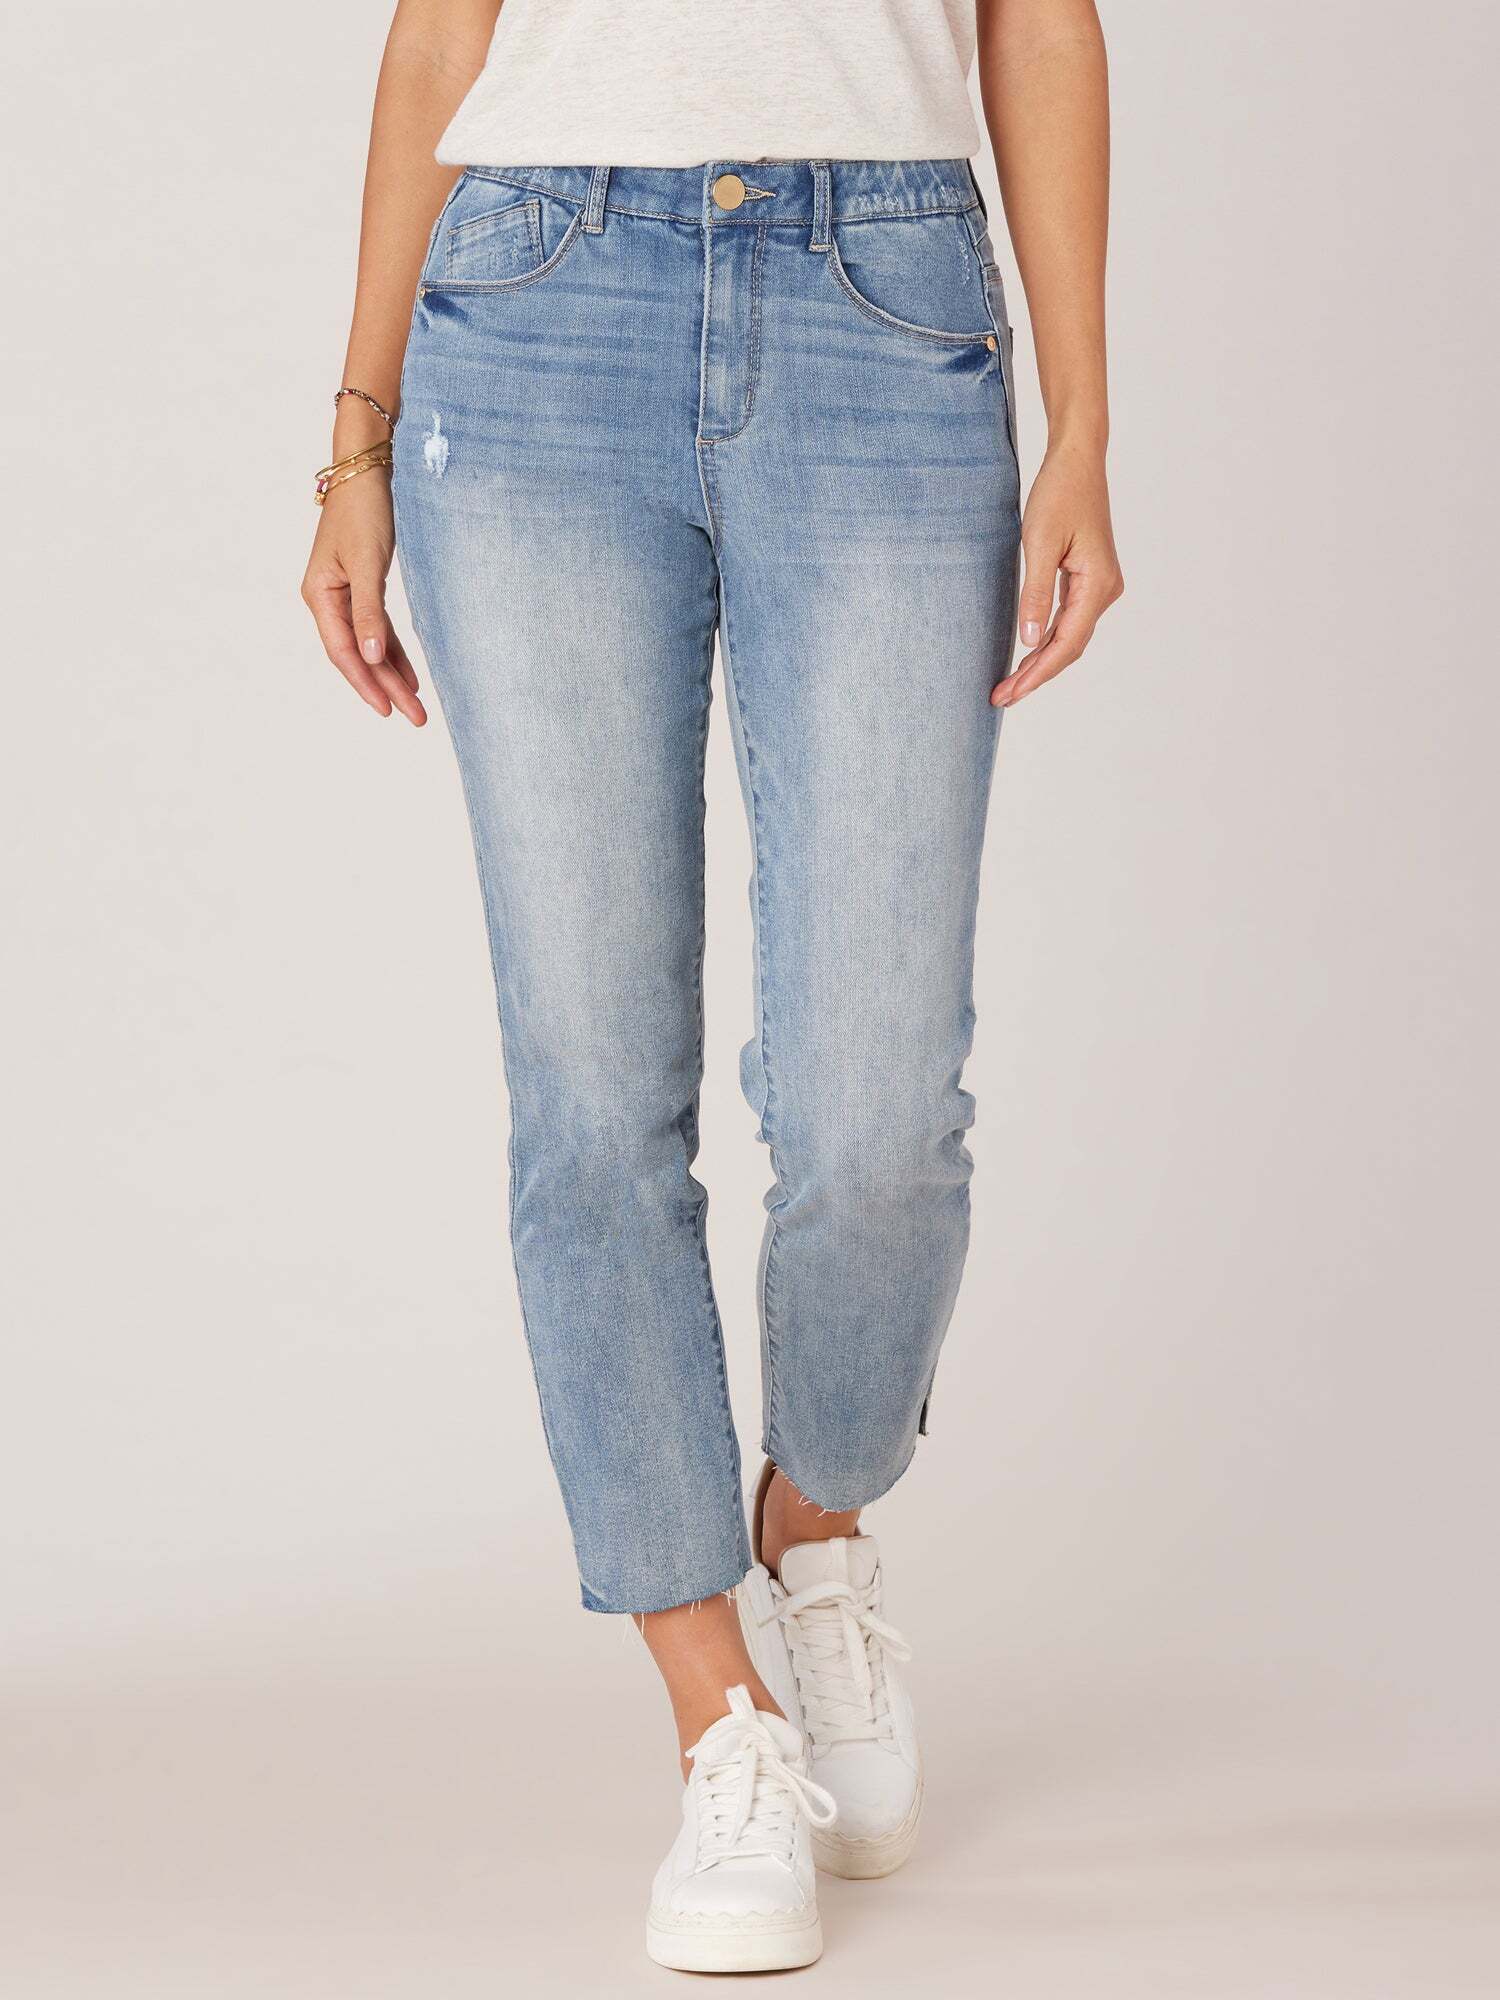 High Rise Vintage Skinny Jean with Raw Hem and Strings